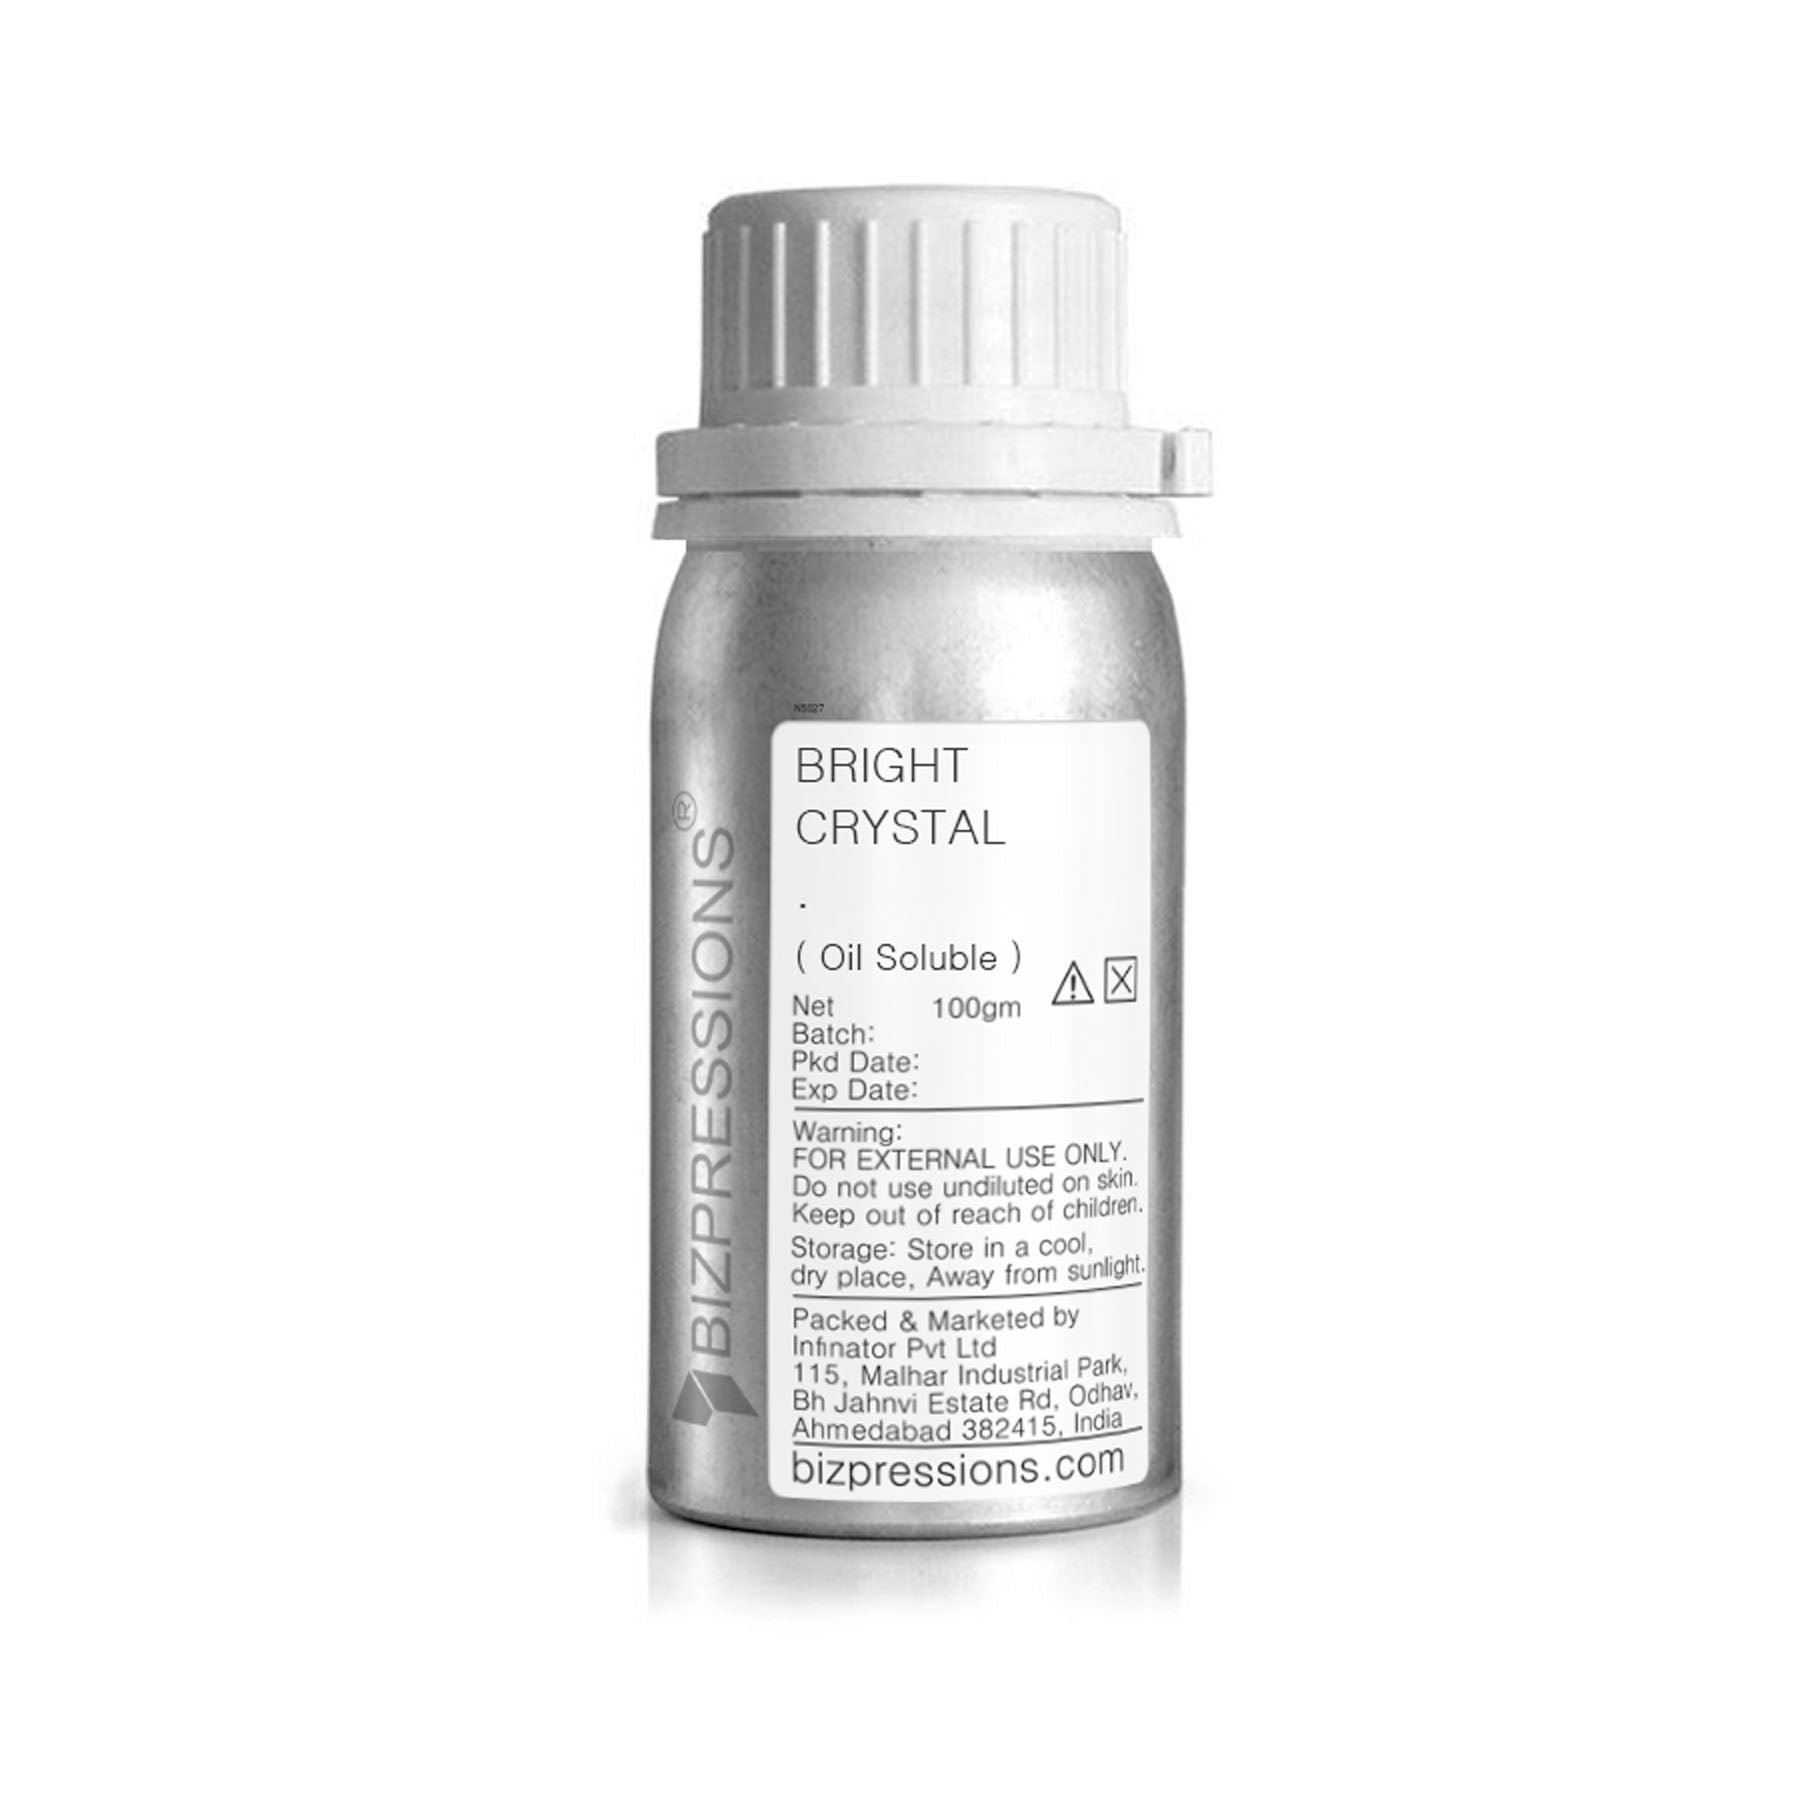 BRIGHT CRYSTAL - Fragrance ( Oil Soluble ) - 100 gm